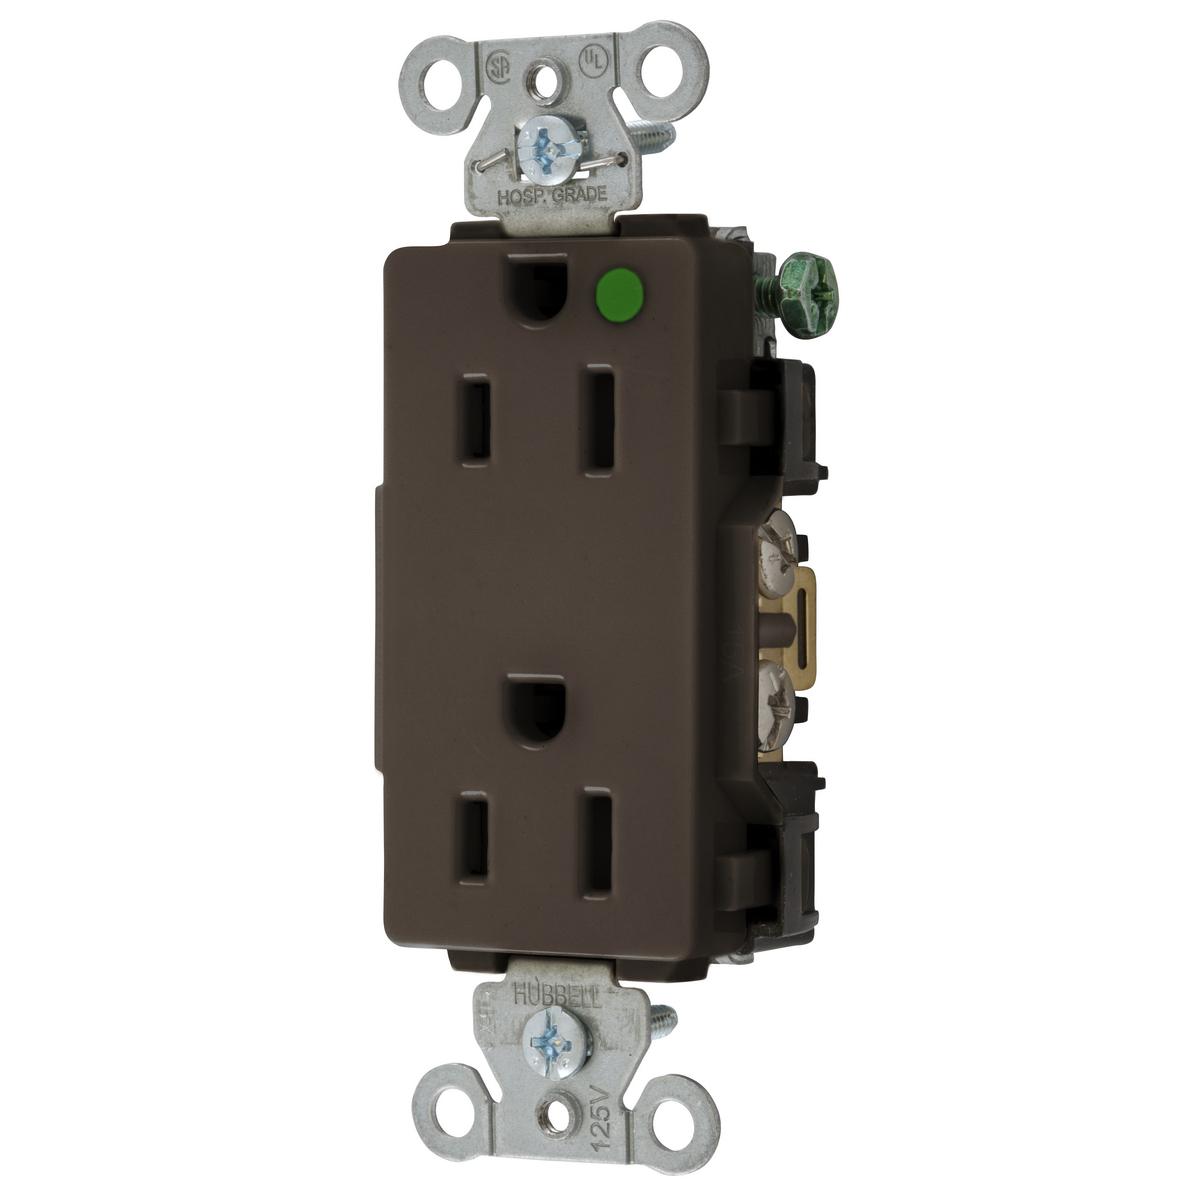 Hubbell 2172 Straight Blade Devices, Decorator Duplex Receptacle, Hospital Grade, Hubbell-Pro, 15A 125V, 2-Pole 3-Wire Grounding, 5-15R, Brown.  ; Triple wipe contacts ; High impact resistant decorator face ; Steel mounting strap ; Self Grounding, USA Product